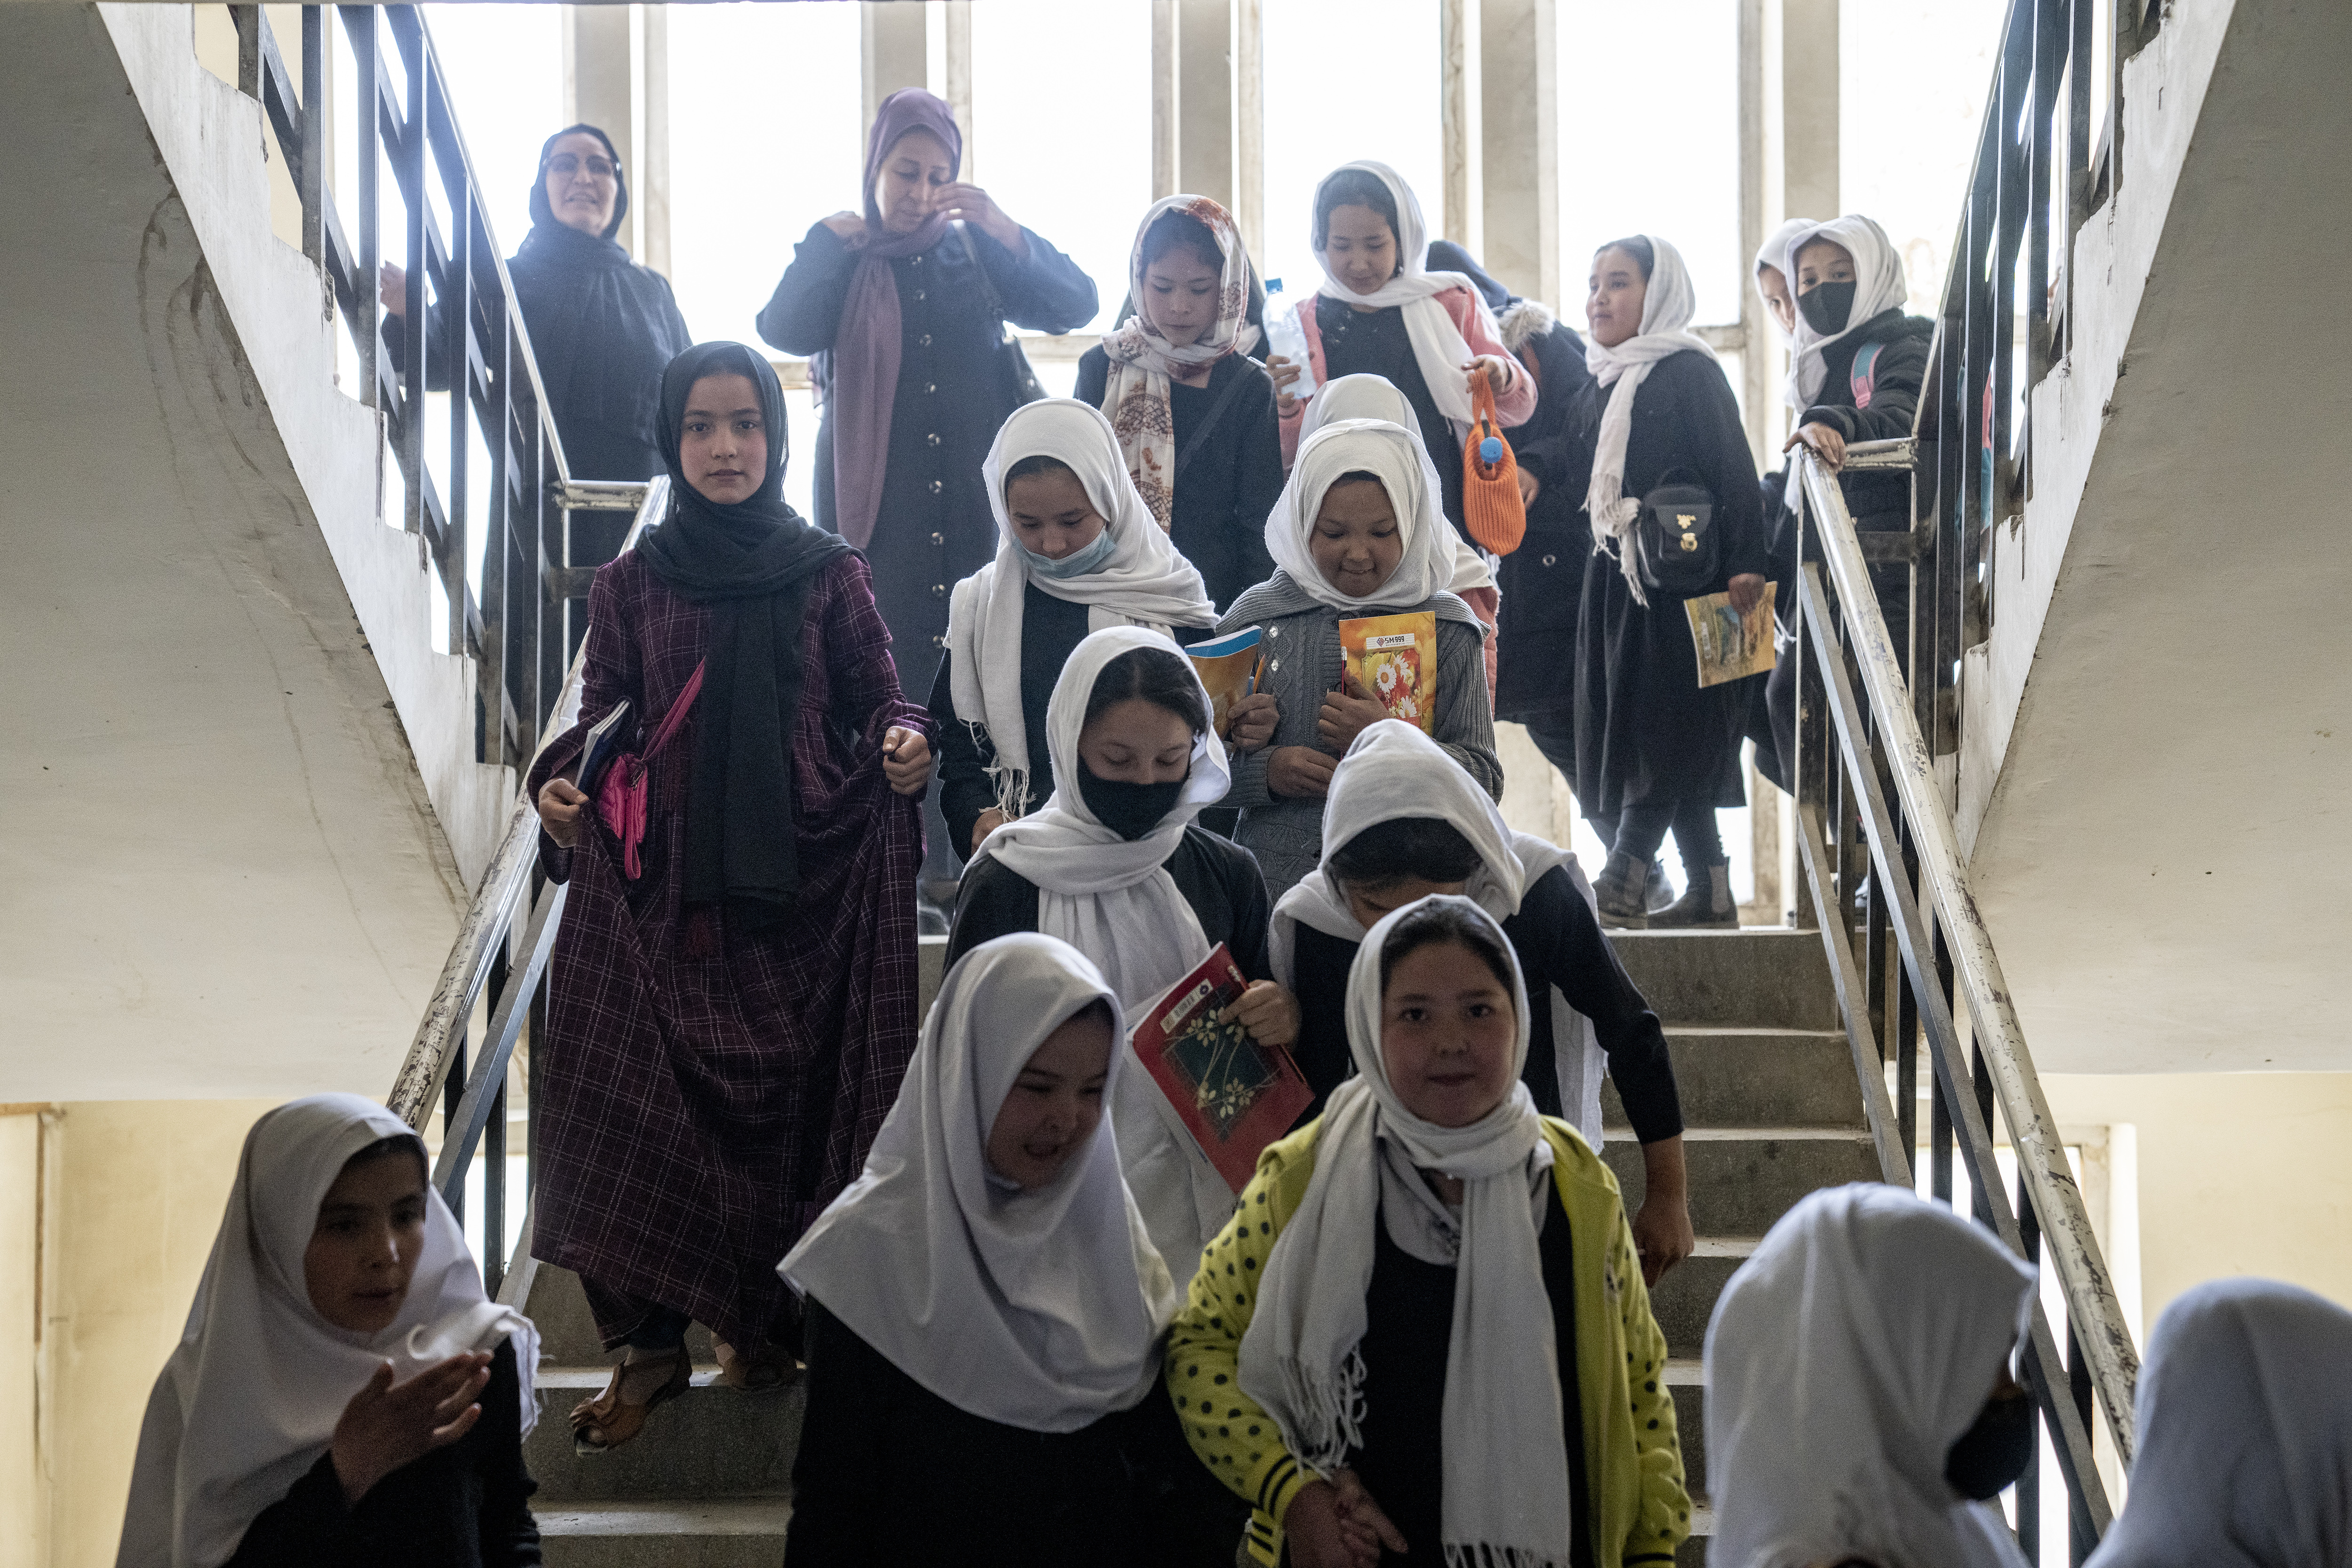 Nearly 80 school girls poisoned and hospitalized in Afghanistan